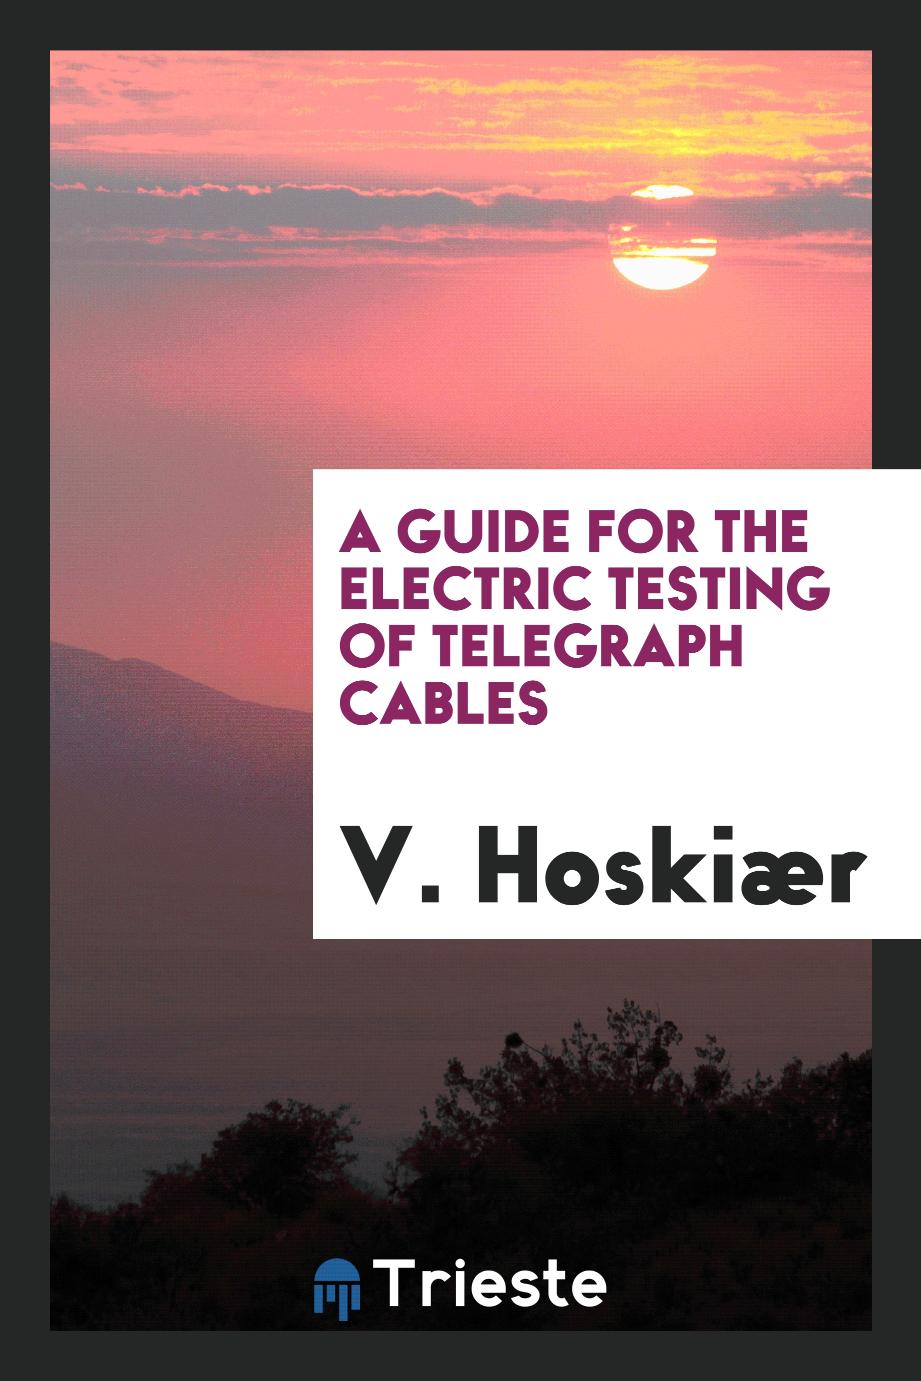 A Guide for the Electric Testing of Telegraph Cables